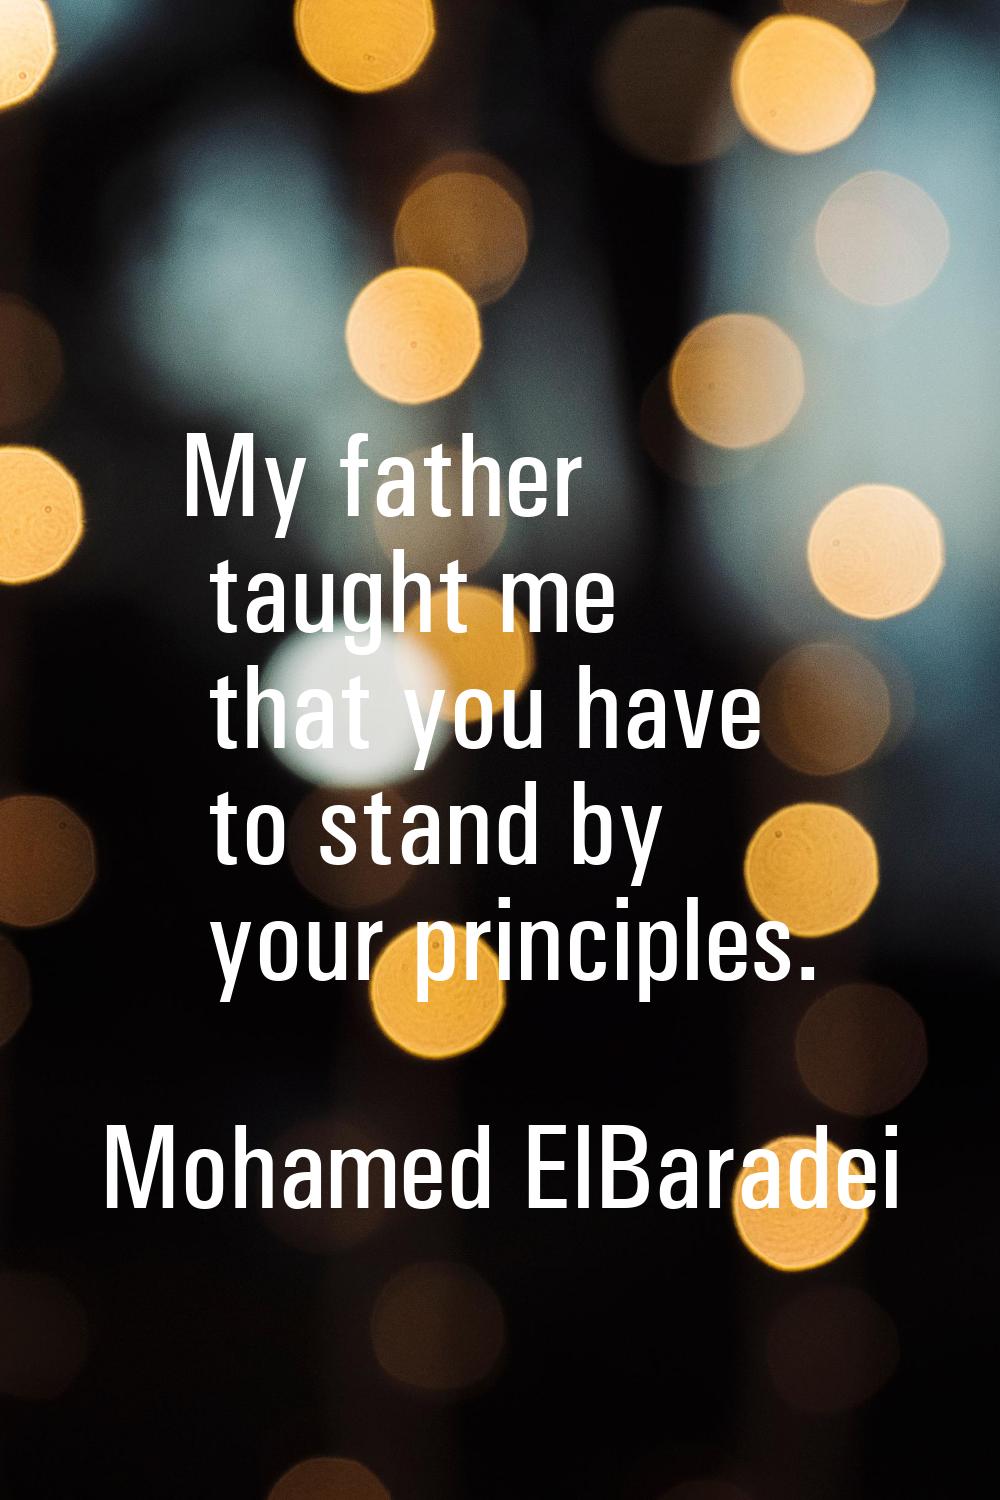 My father taught me that you have to stand by your principles.